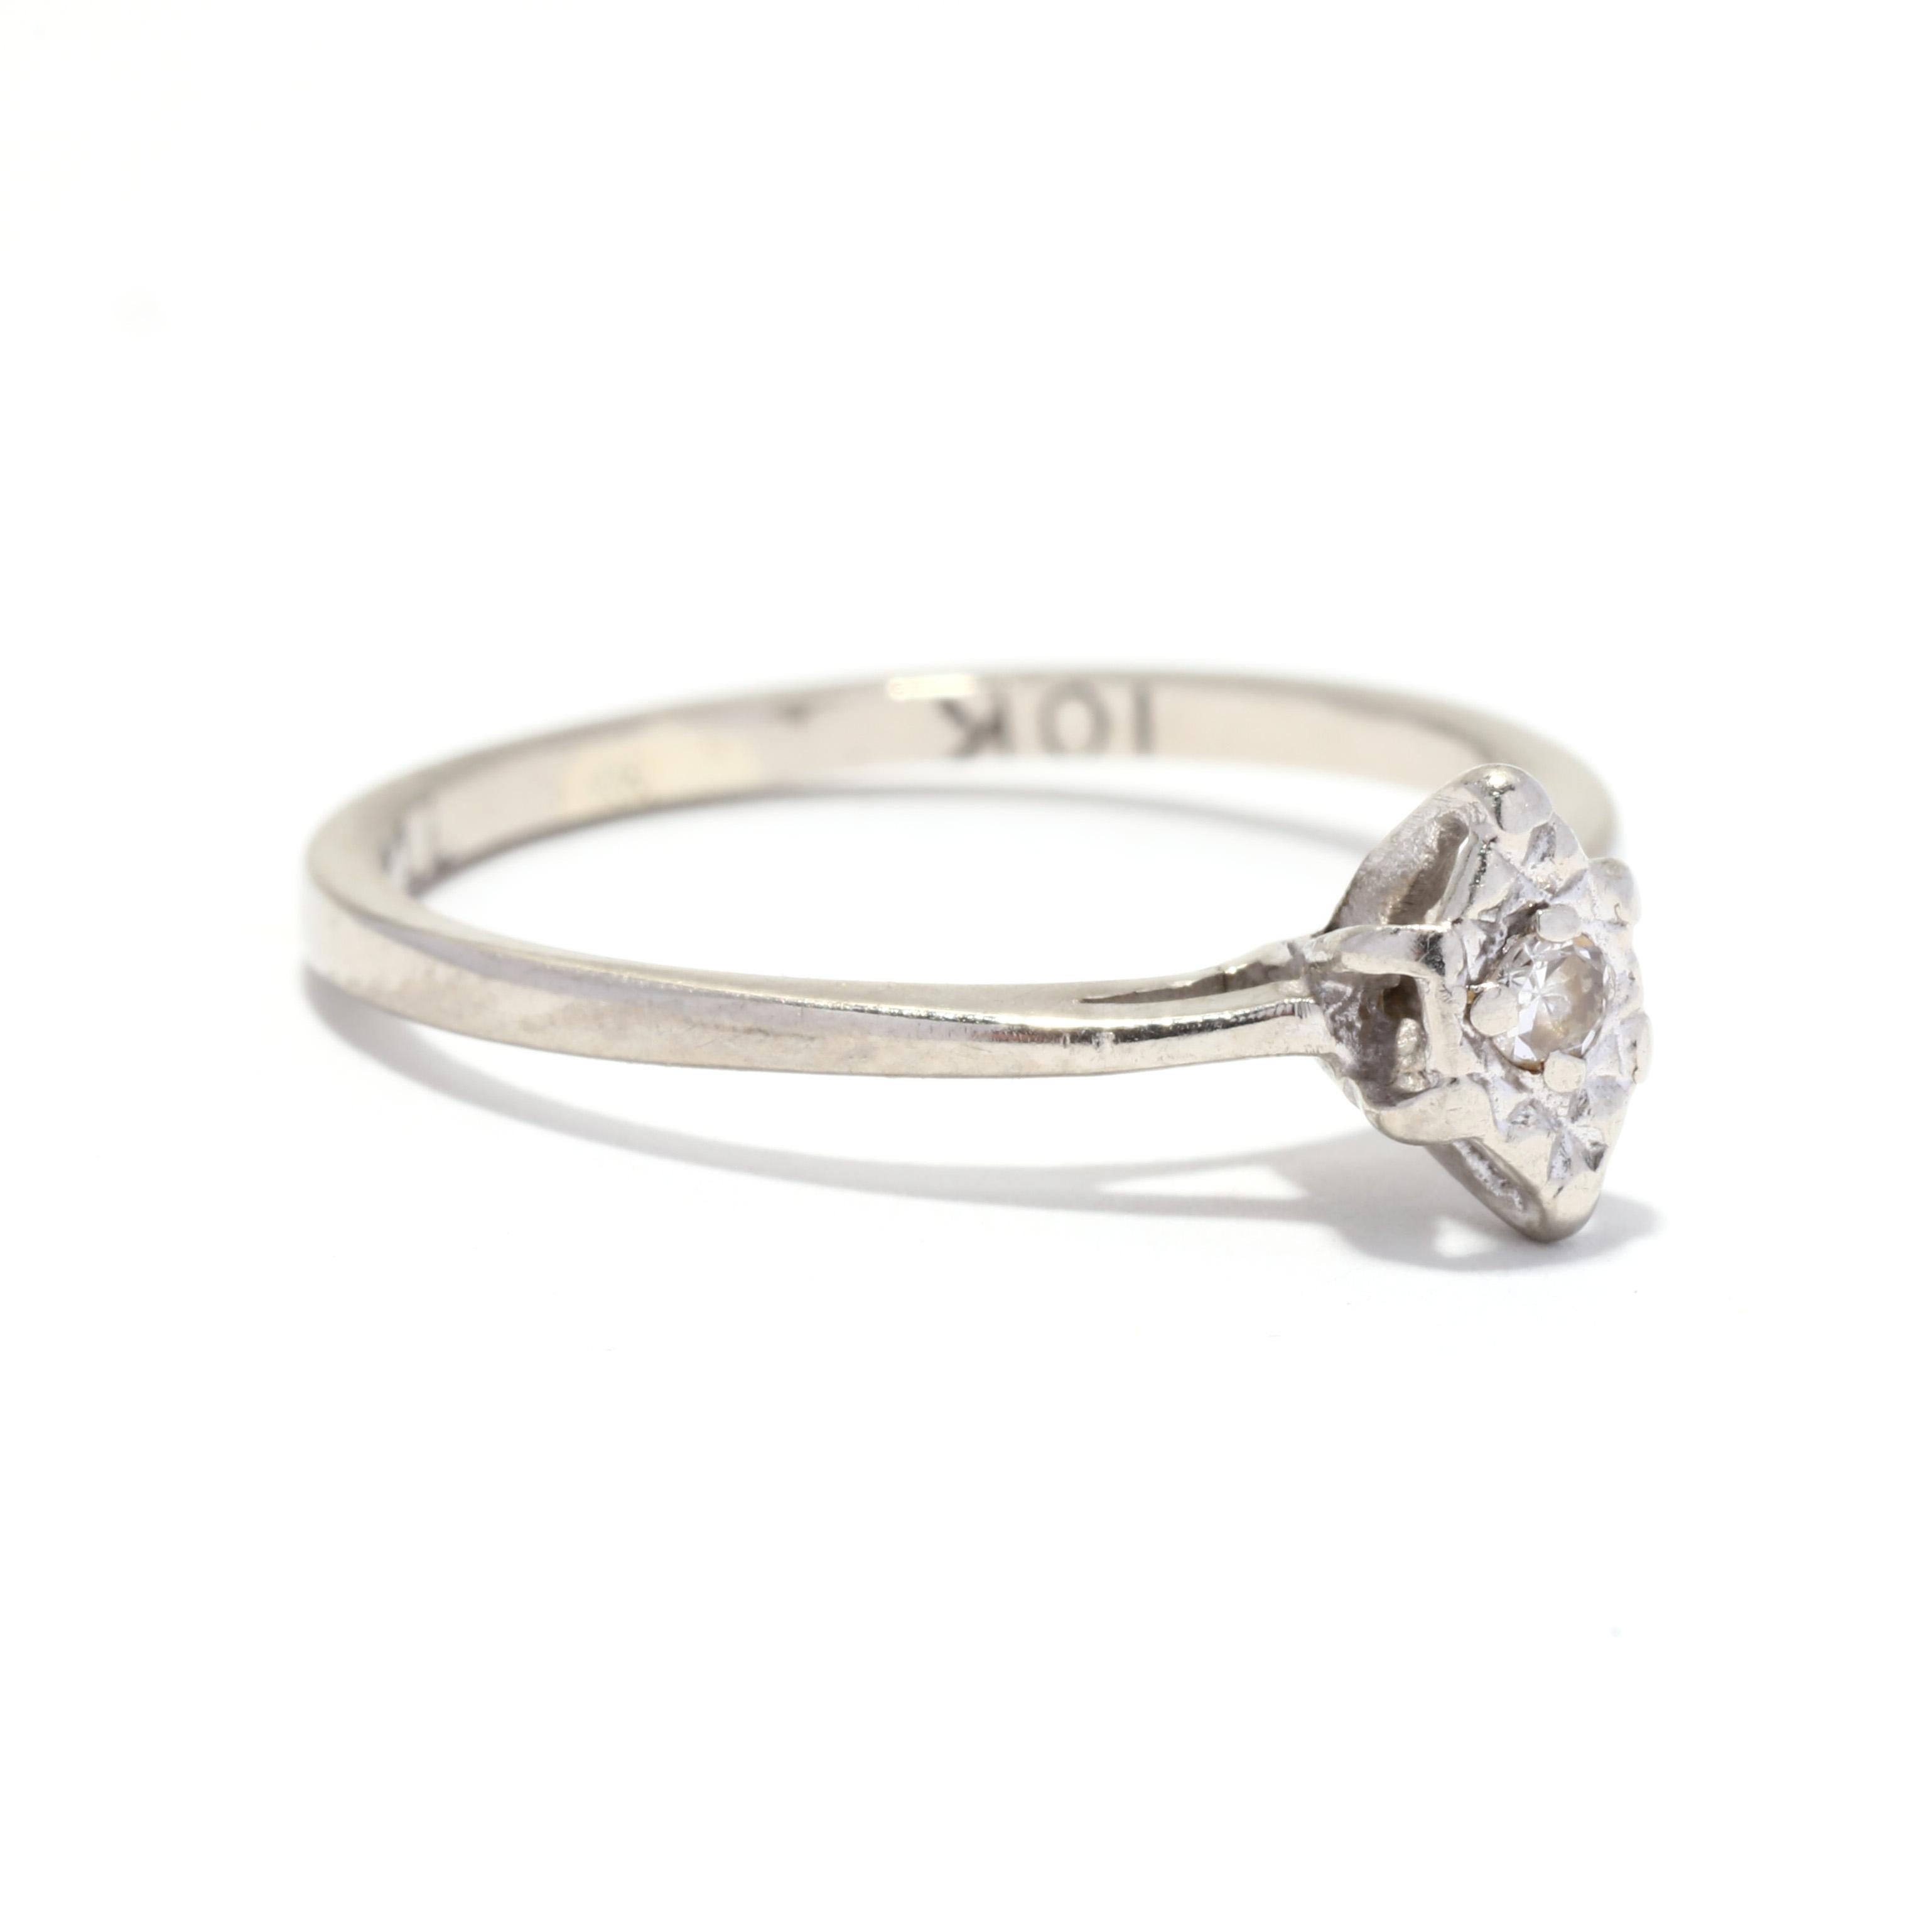 A vintage 10 karat white gold mini diamond navette ring. This ring features a single cut nouns diamond weighing approximately .02 carat set in a marquise shape mounting with a thin band.

Stones:
- diamond, 1 stone
- single cut round
- 1.90 mm
-